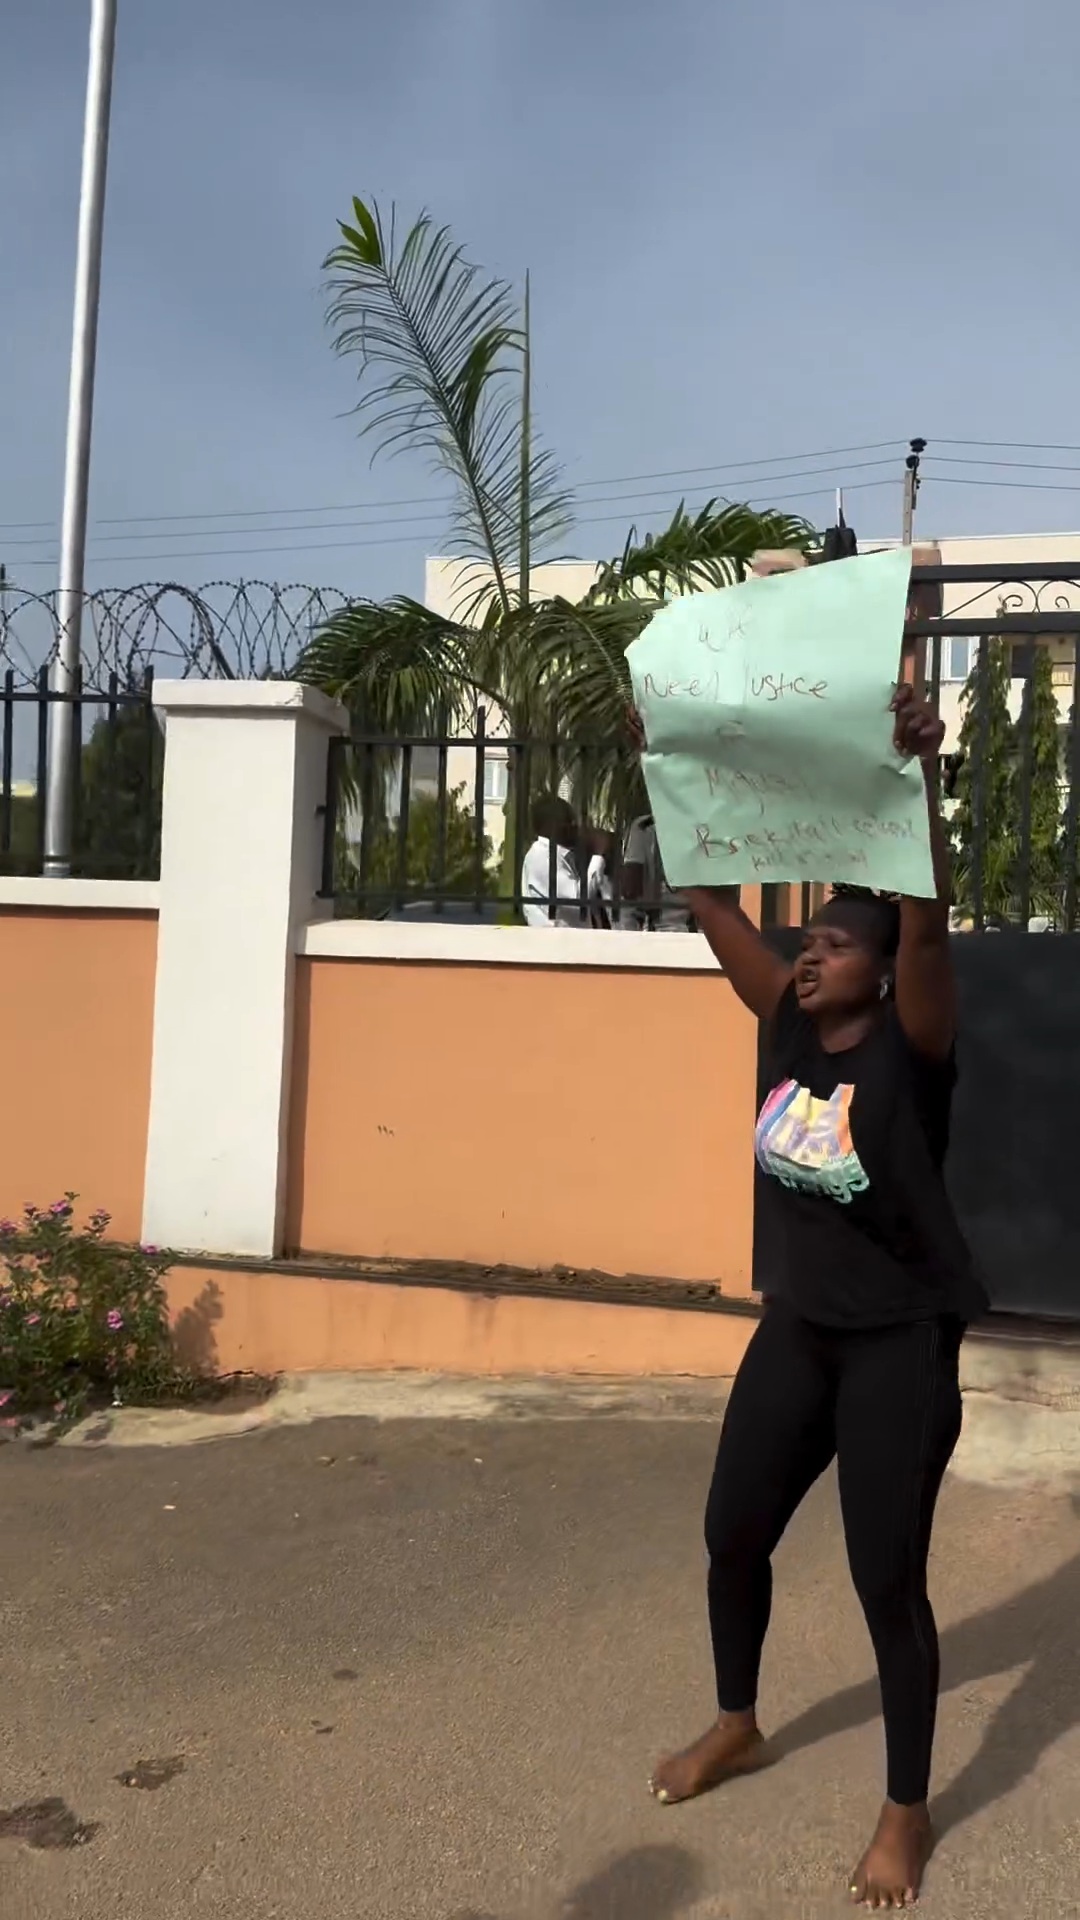 Mum of boy, 4, who died during feeding at Abuja school stages protest outside the school to demand justice (video)